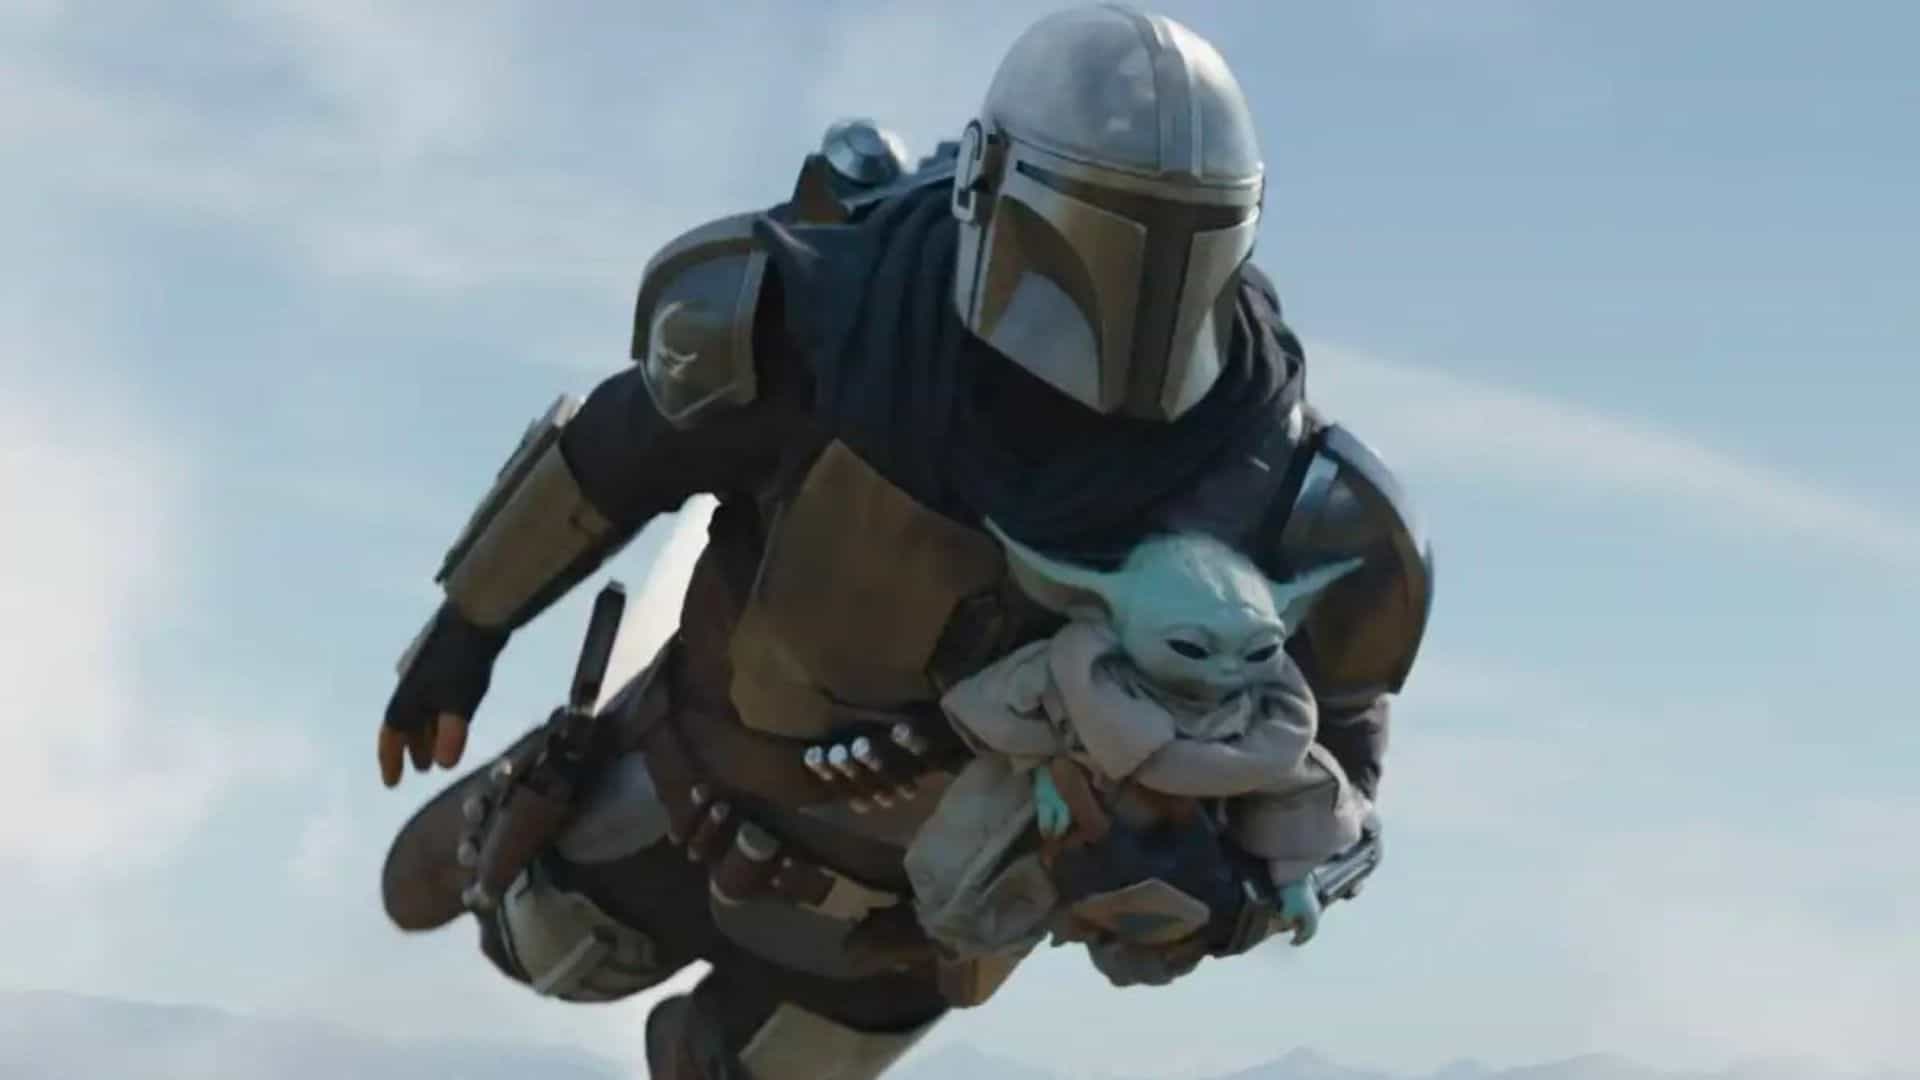 The Mandalorian, Din Djarin, flies with his jet pack carrying Grogu, The Child, in this image from Disney Plus.